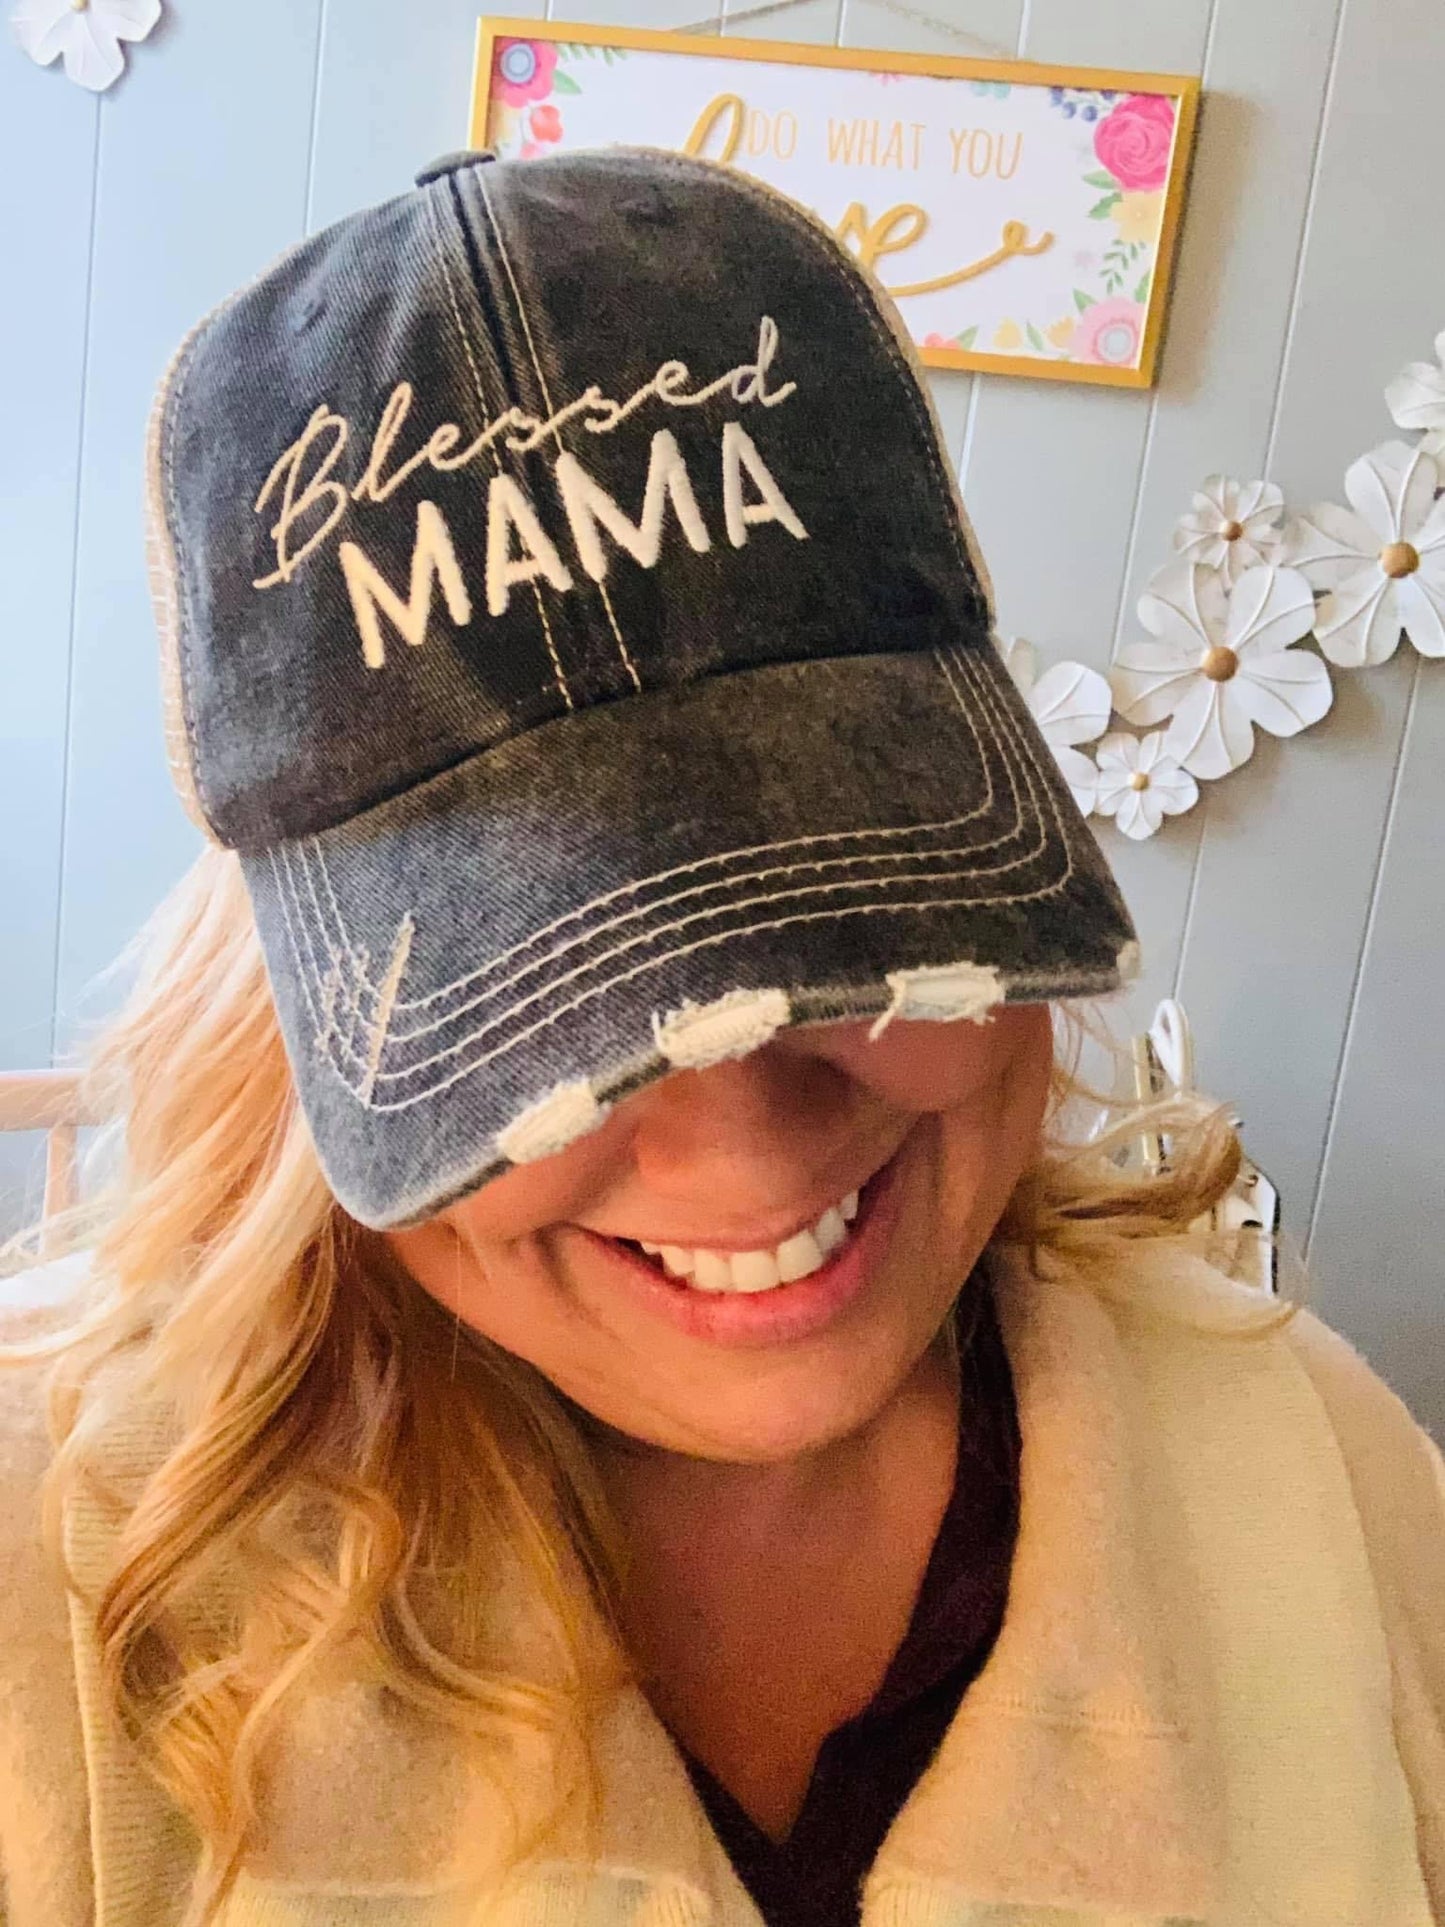 Mom hats Blessed mama Embroidered distressed women’s trucker cap Black Brown mesh back